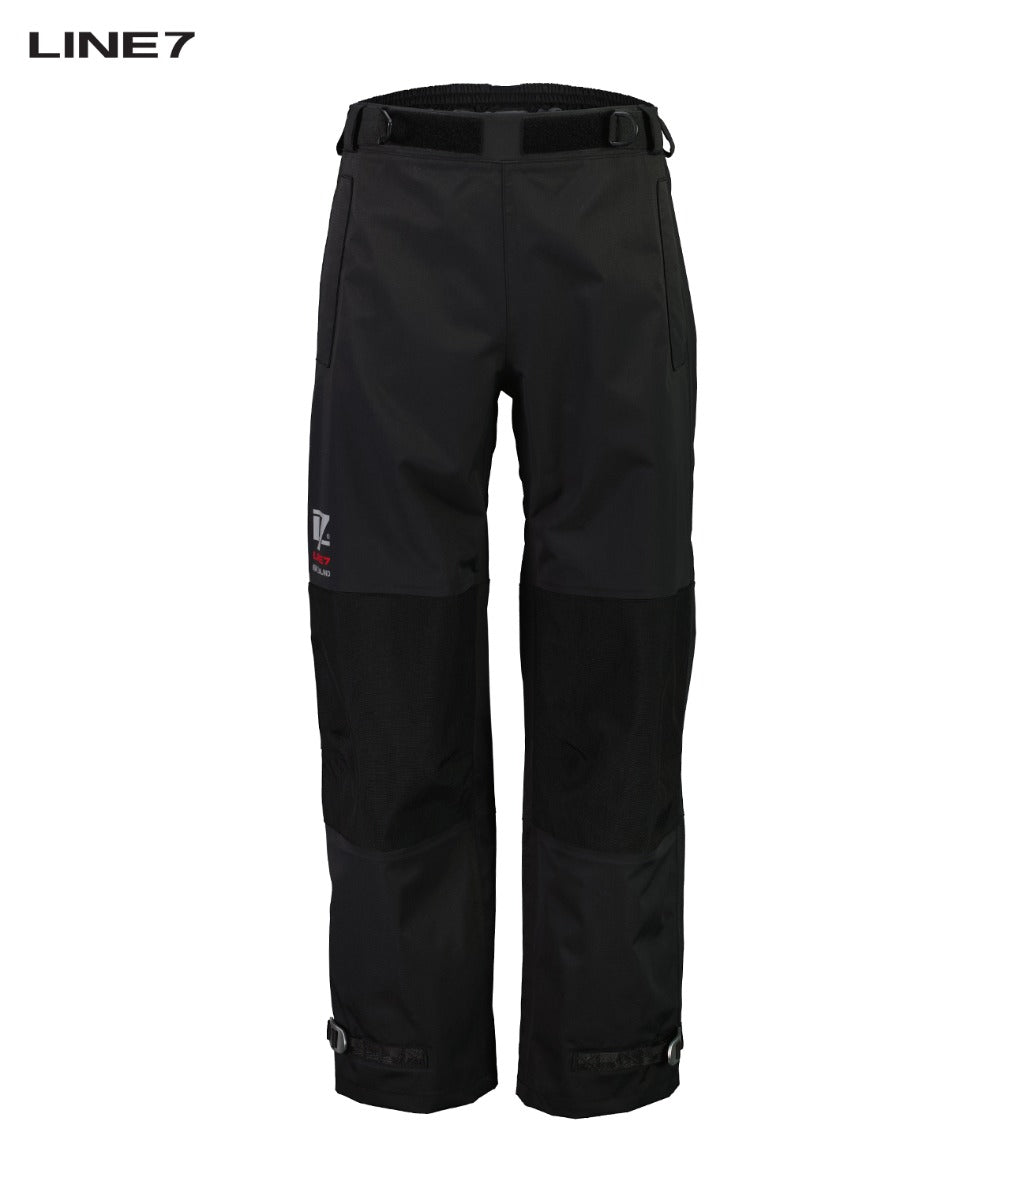 http://sugarloafclothingco.co.uk/cdn/shop/products/line-7-women-s-territory-storm-pro20-waterproof-overtrouser.jpg?v=1666031956